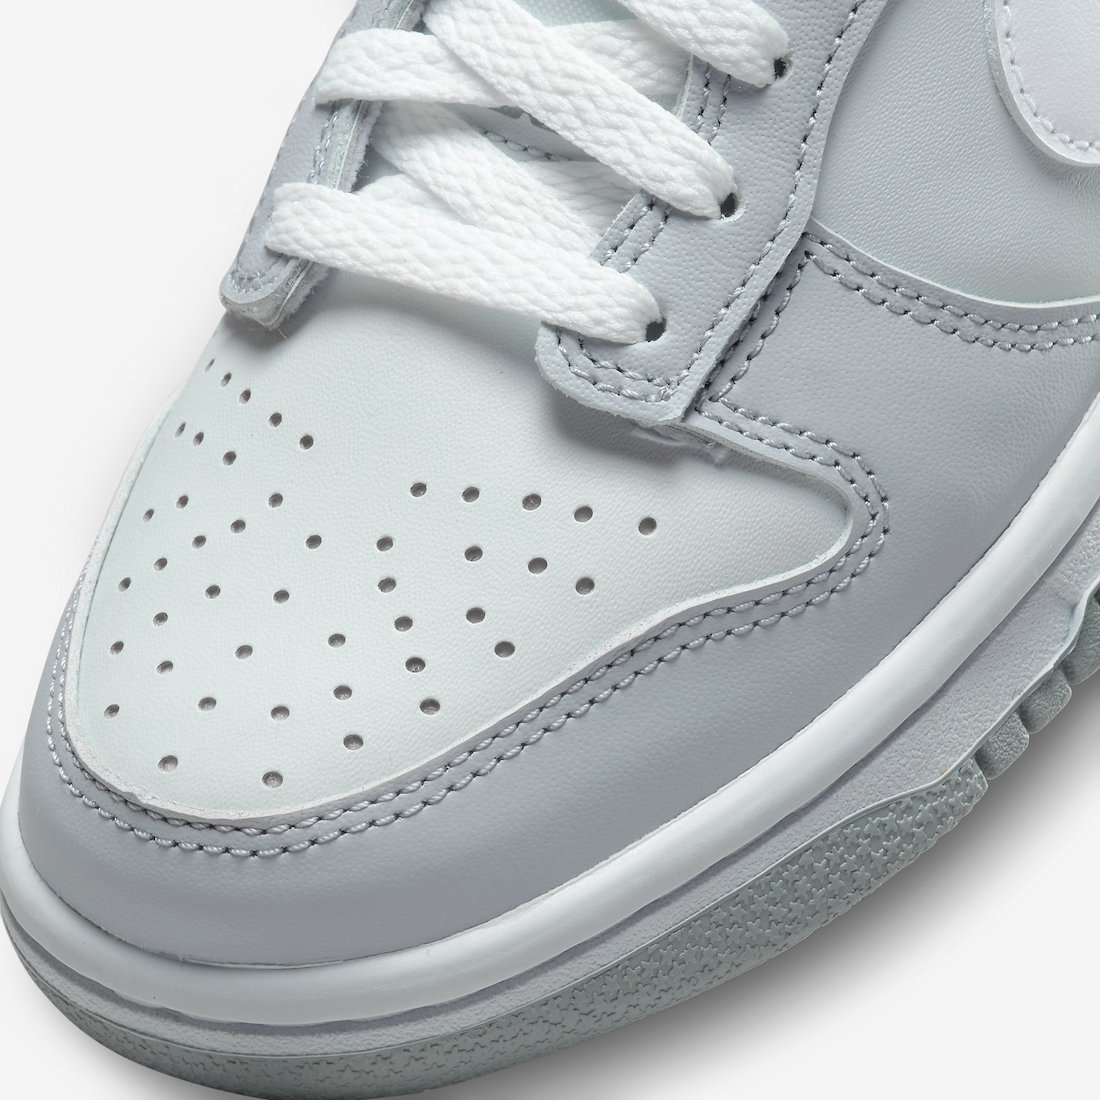 Nike Dunk Low GS Grey DH9765 001 Release Date 6